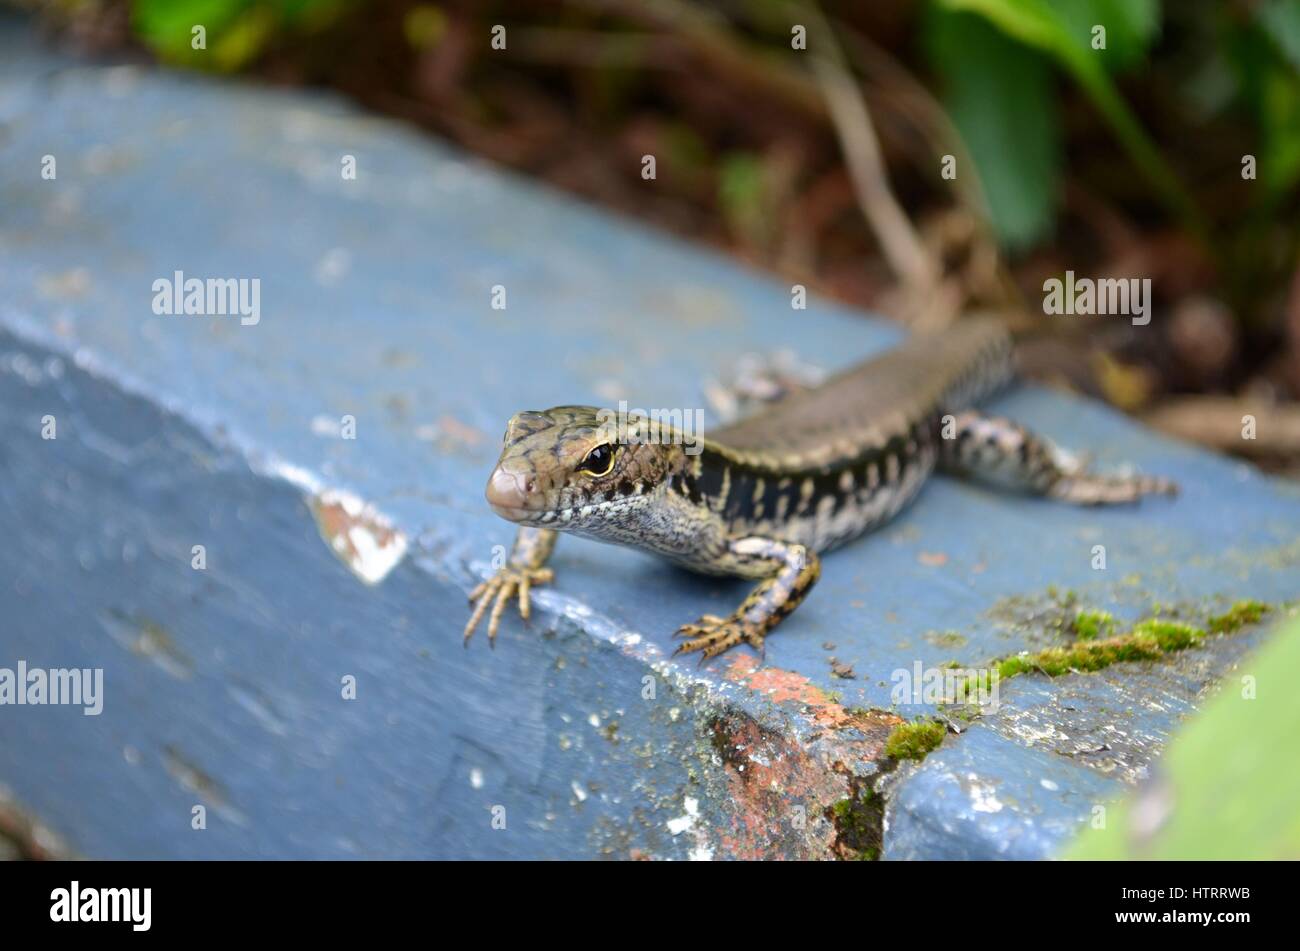 Common garden skink lizard zoom in close up Stock Photo - Alamy